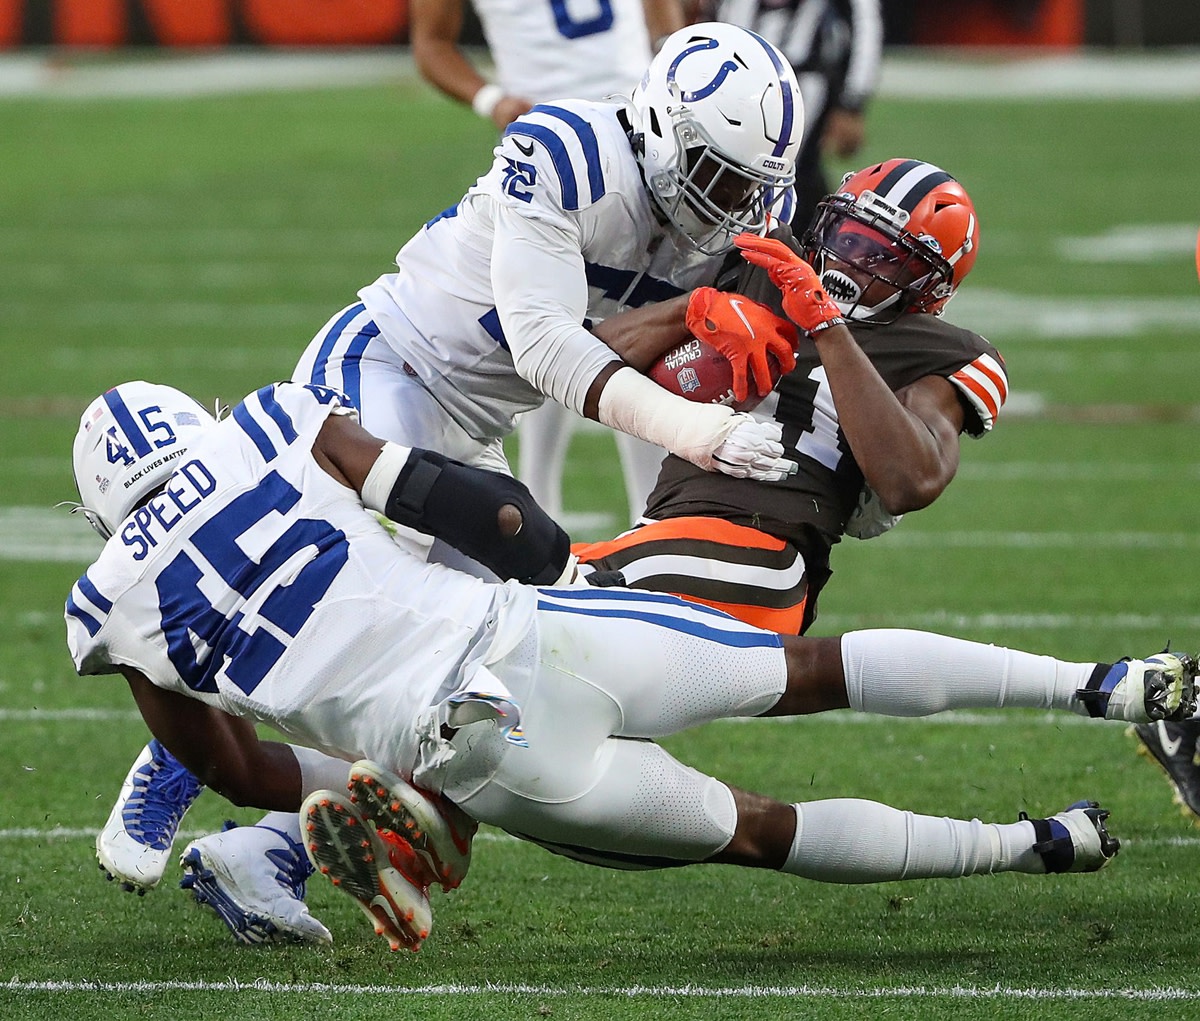 Indianapolis Colts defensive end Ben Banogu (52) tackles Cleveland Browns wide receiver Donovan Peoples-Jones (11) during the third quarter of the NFL week 5 game at First Energy Stadium in Cleveland, Ohio, on Sunday, Oct. 11, 2020. The Browns won, 32-23.

Indianapolis Colts At Browns At First Energy Stadium In Nfl Week 5 Cleveand Ohio Sunday Oct 11 2020